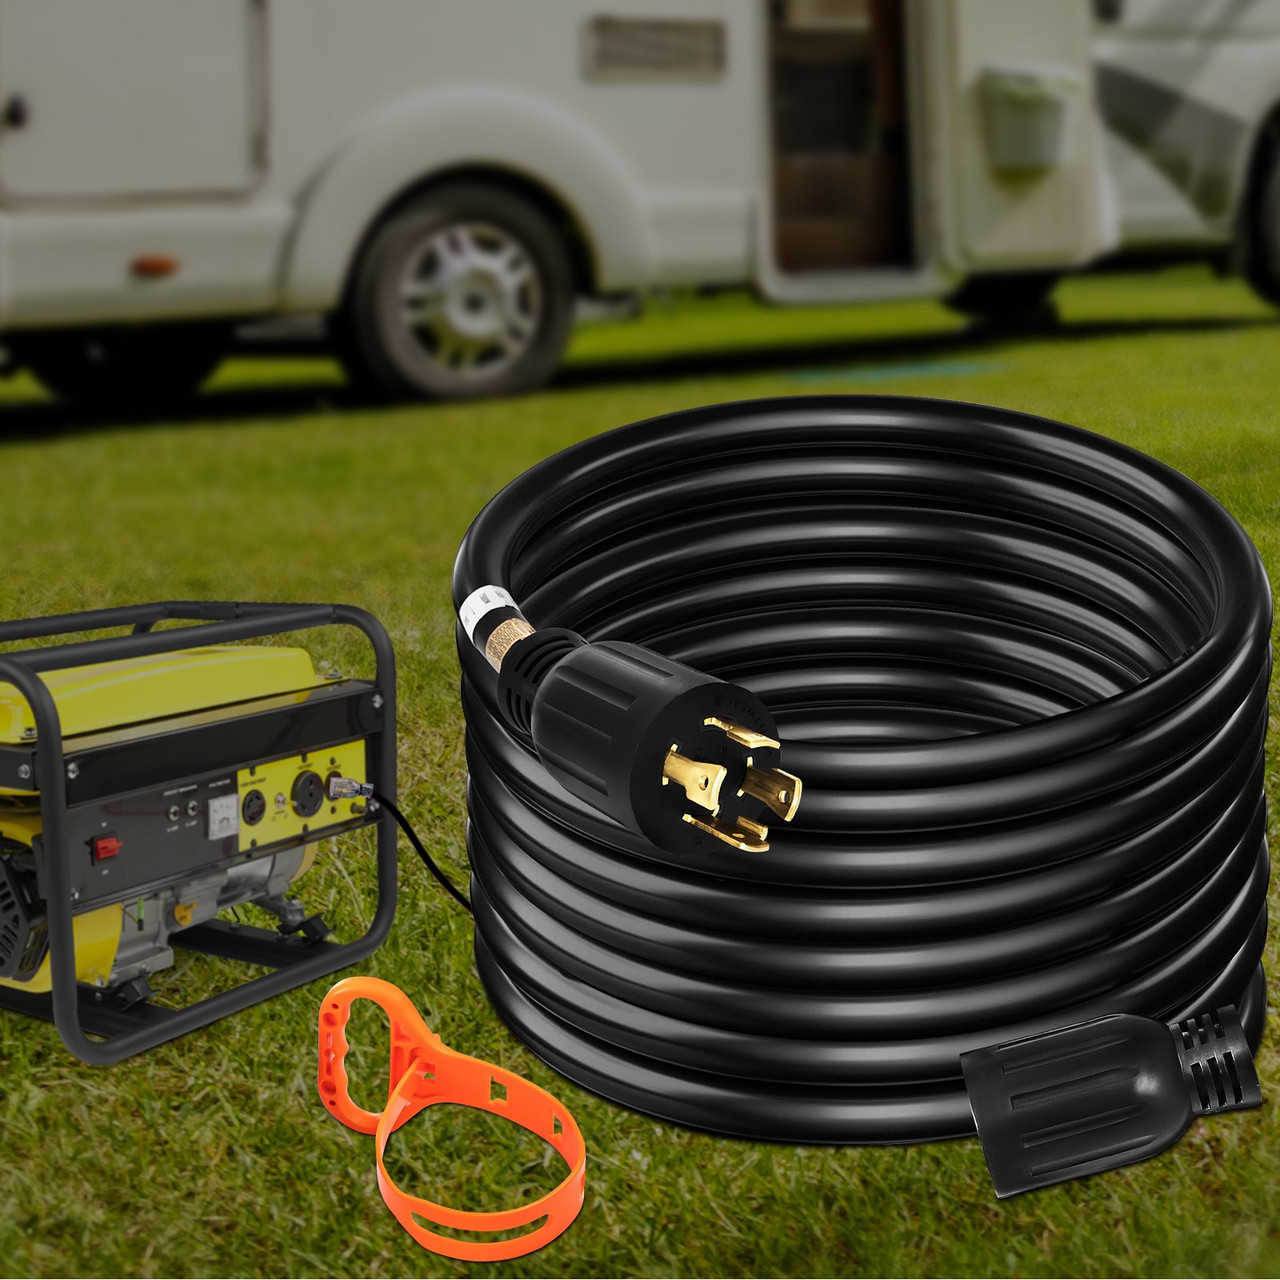 50Ft 30 Amp Generator Extension Cord 4 Wire 10 Gauge Generator Cord 125V 250V Generator Power Cord Twist Lock Connectors (50 Ft 30 Amp)